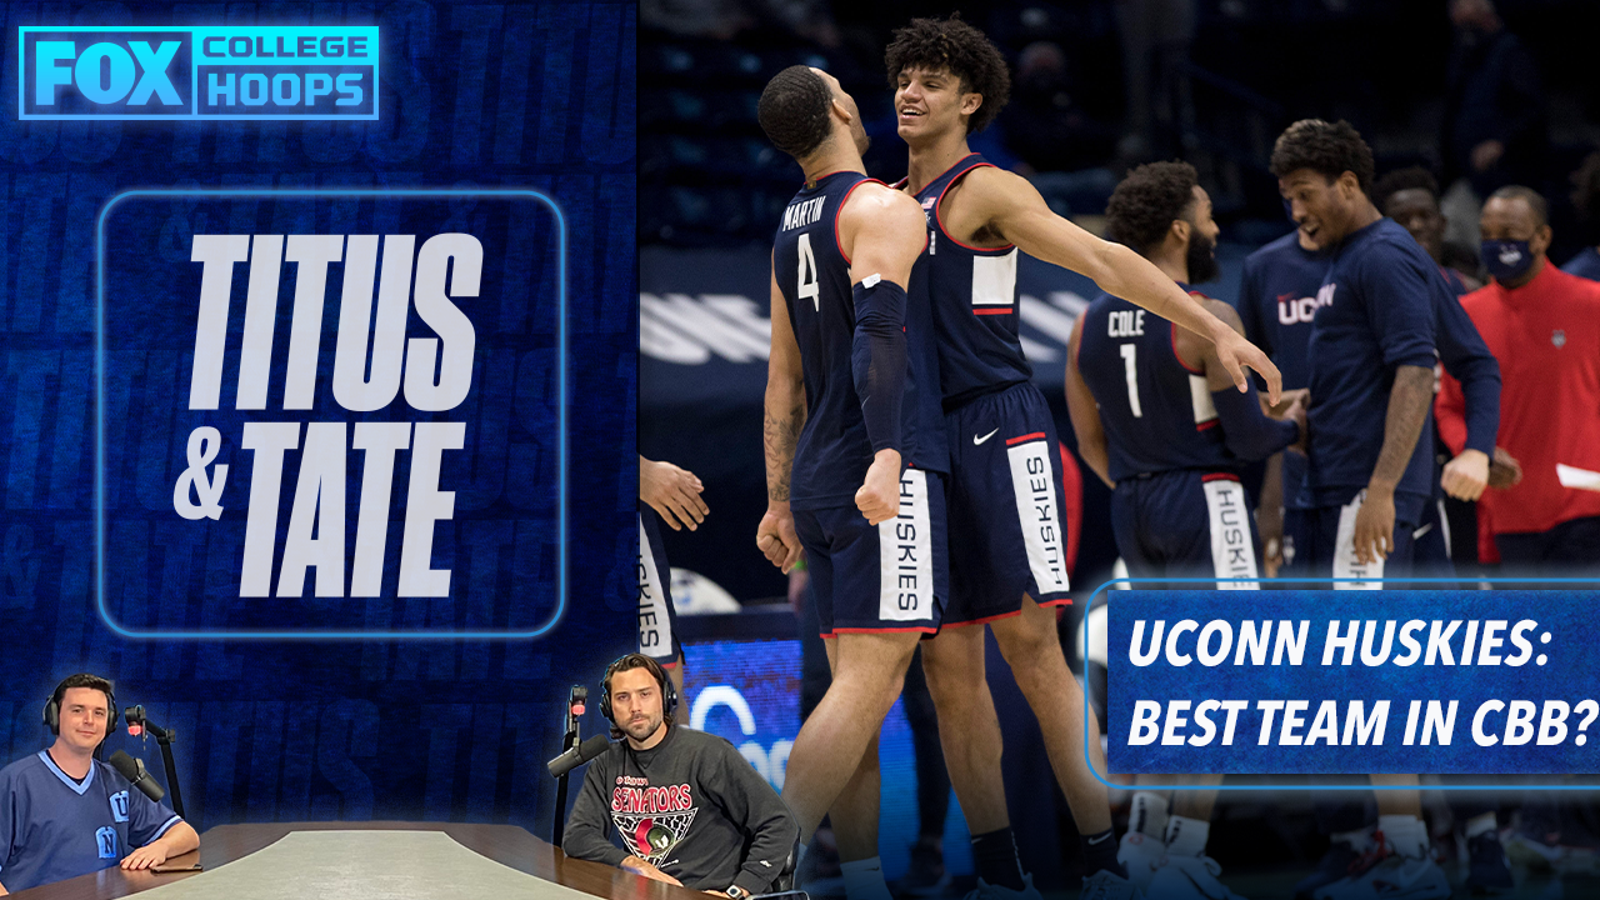 Beryl TV play-613c78eb5000983--UconnTN_1670546777183 College basketball report card: Purdue, UConn among those earning top marks Sports 